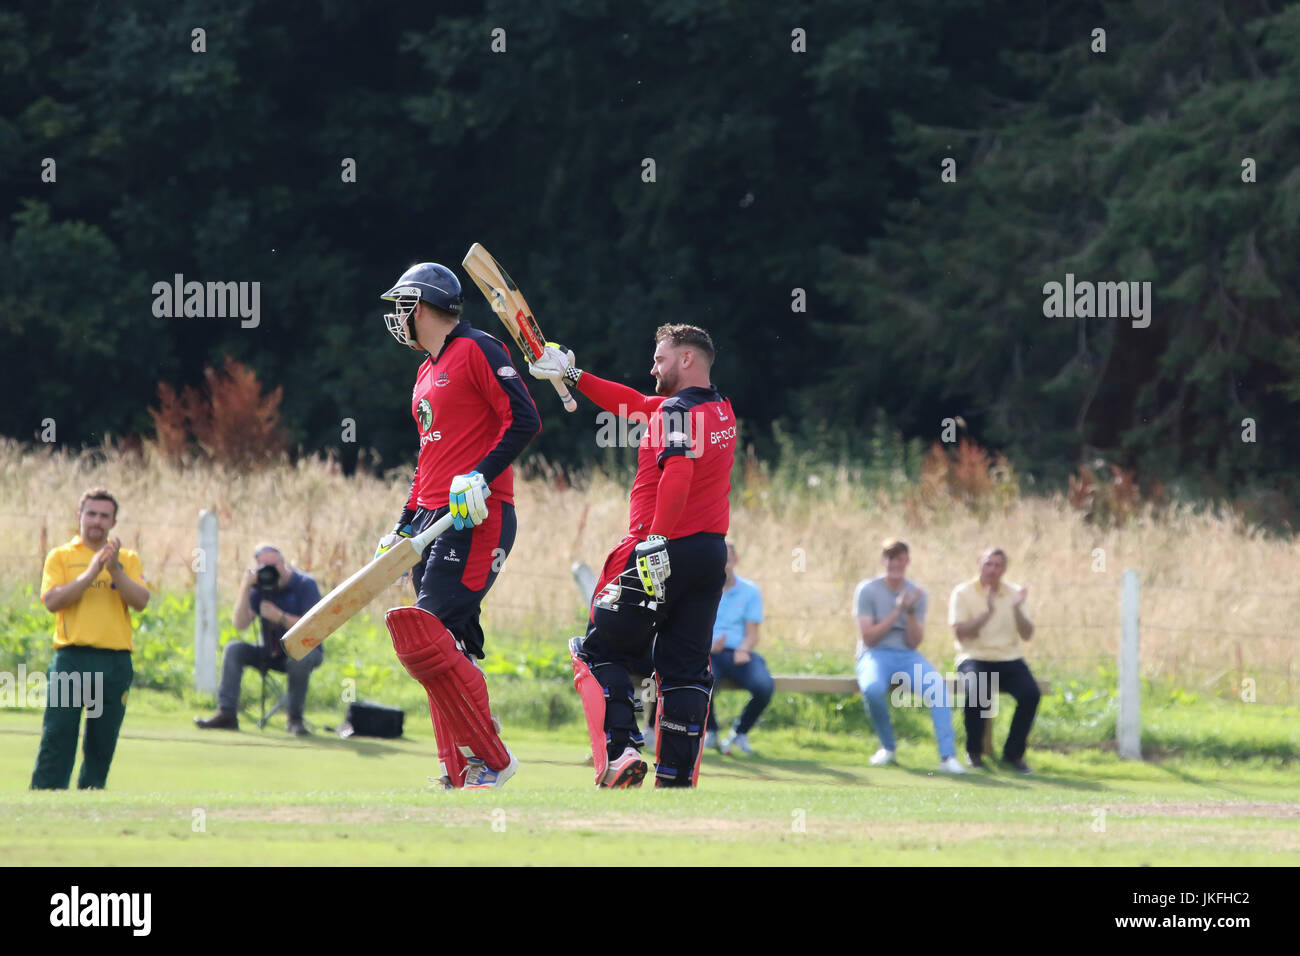 The Lawn, Waringstown, Northern Ireland, UK. 23rd July, 2017. The Lagan Valley Steels Twenty 20 Cup Final 2017. Waringstown retained the trophy with a 26 run win over North Down in today's final. James Hall (right) celebrates his century. Credit: David Hunter/Alamy Live News Stock Photo